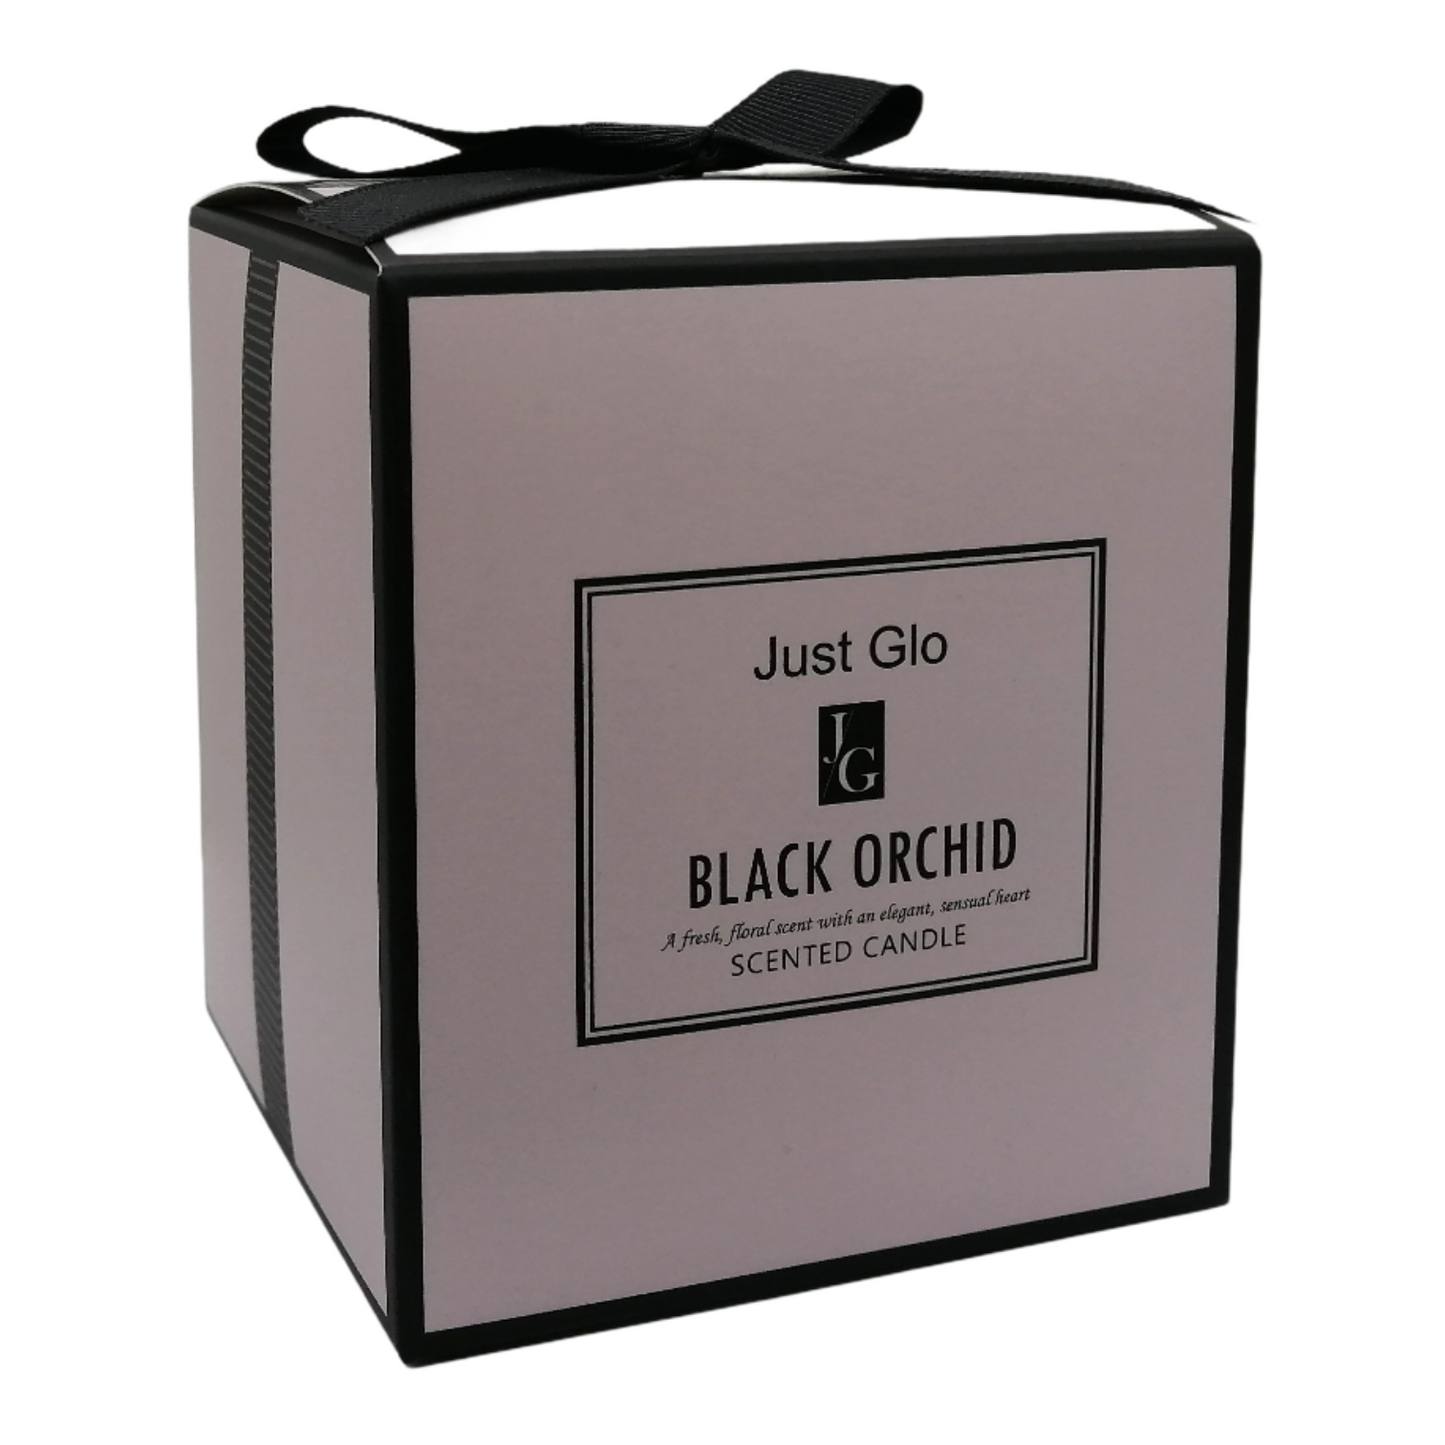 Just Glo Candle Black Orchid 140g